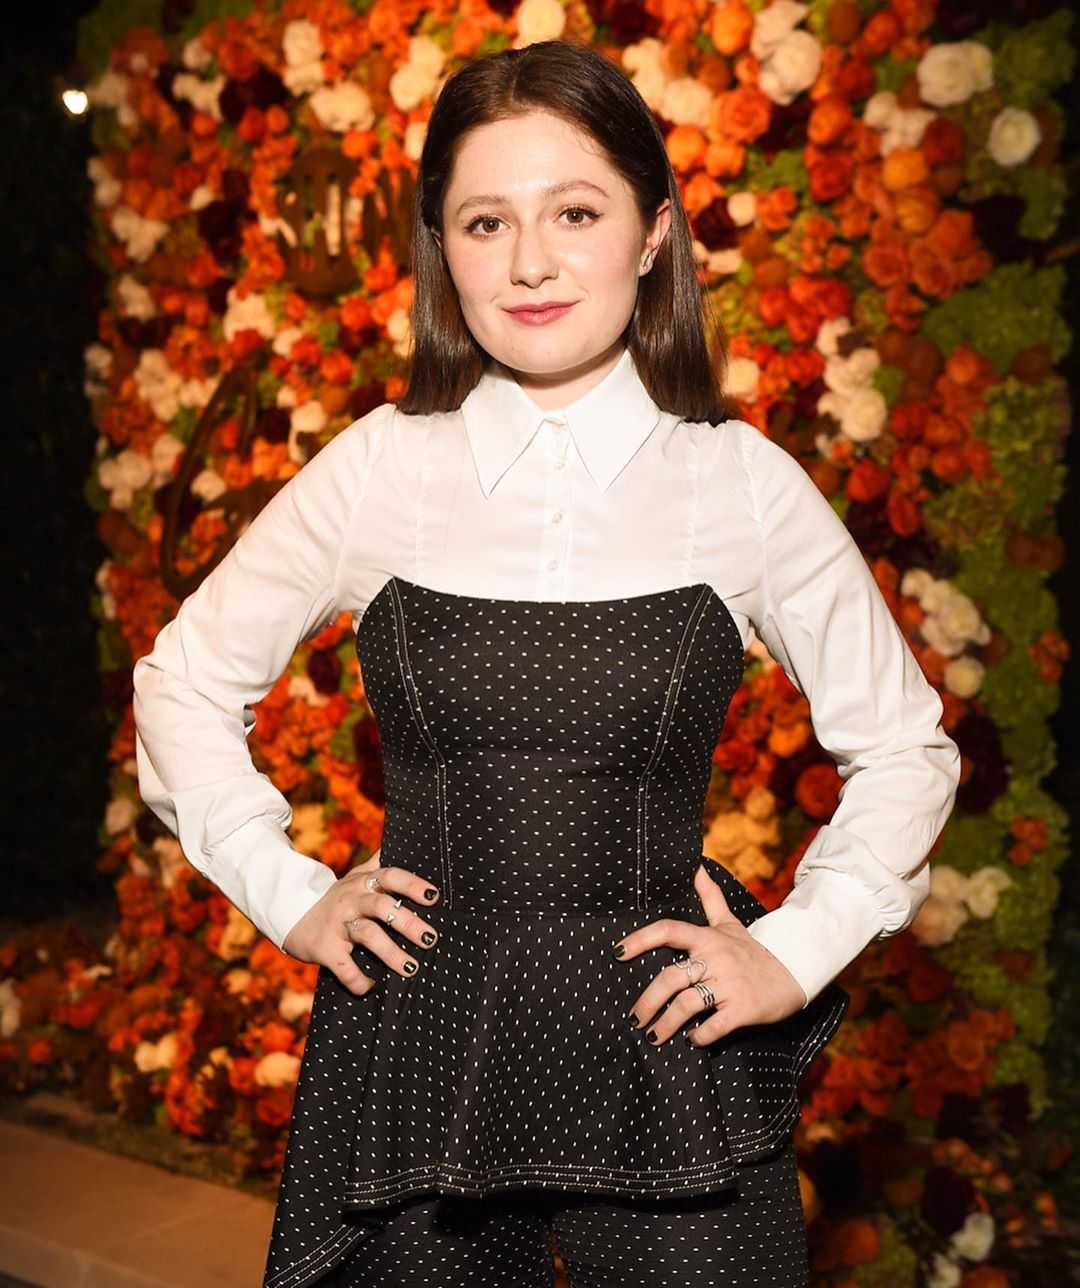 70+ Hot Pictures Of Emma Kenney From Shameless 58